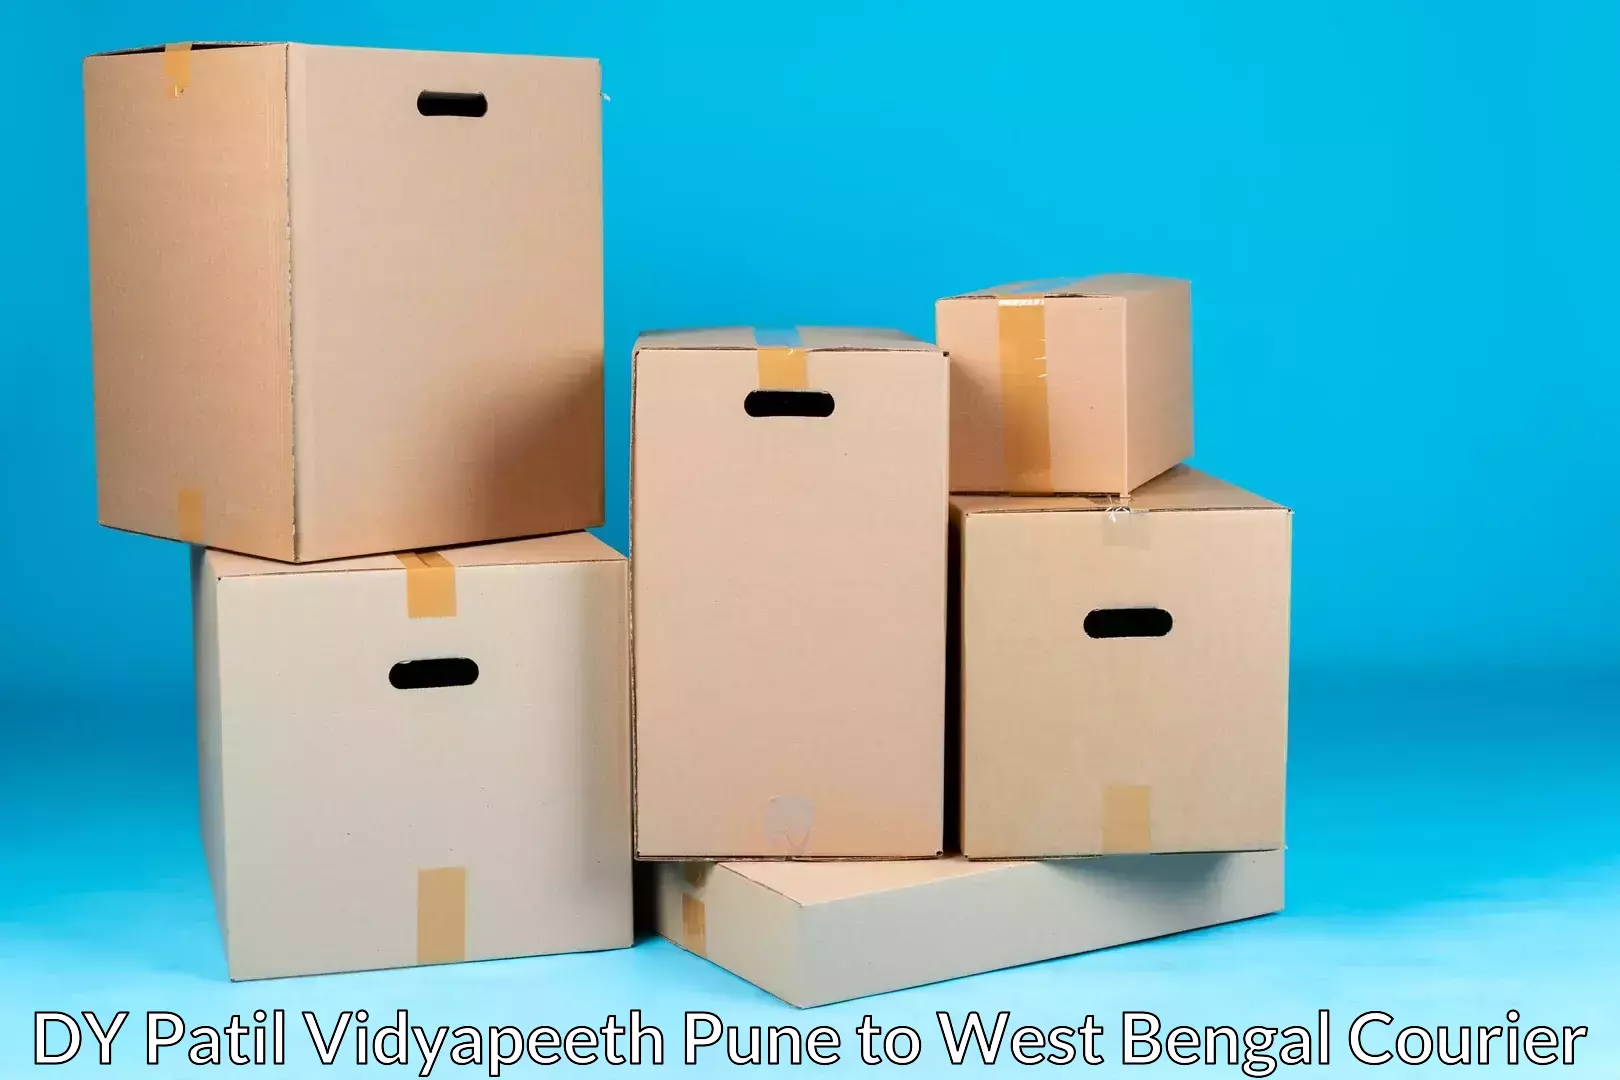 Home relocation experts DY Patil Vidyapeeth Pune to Jhargram